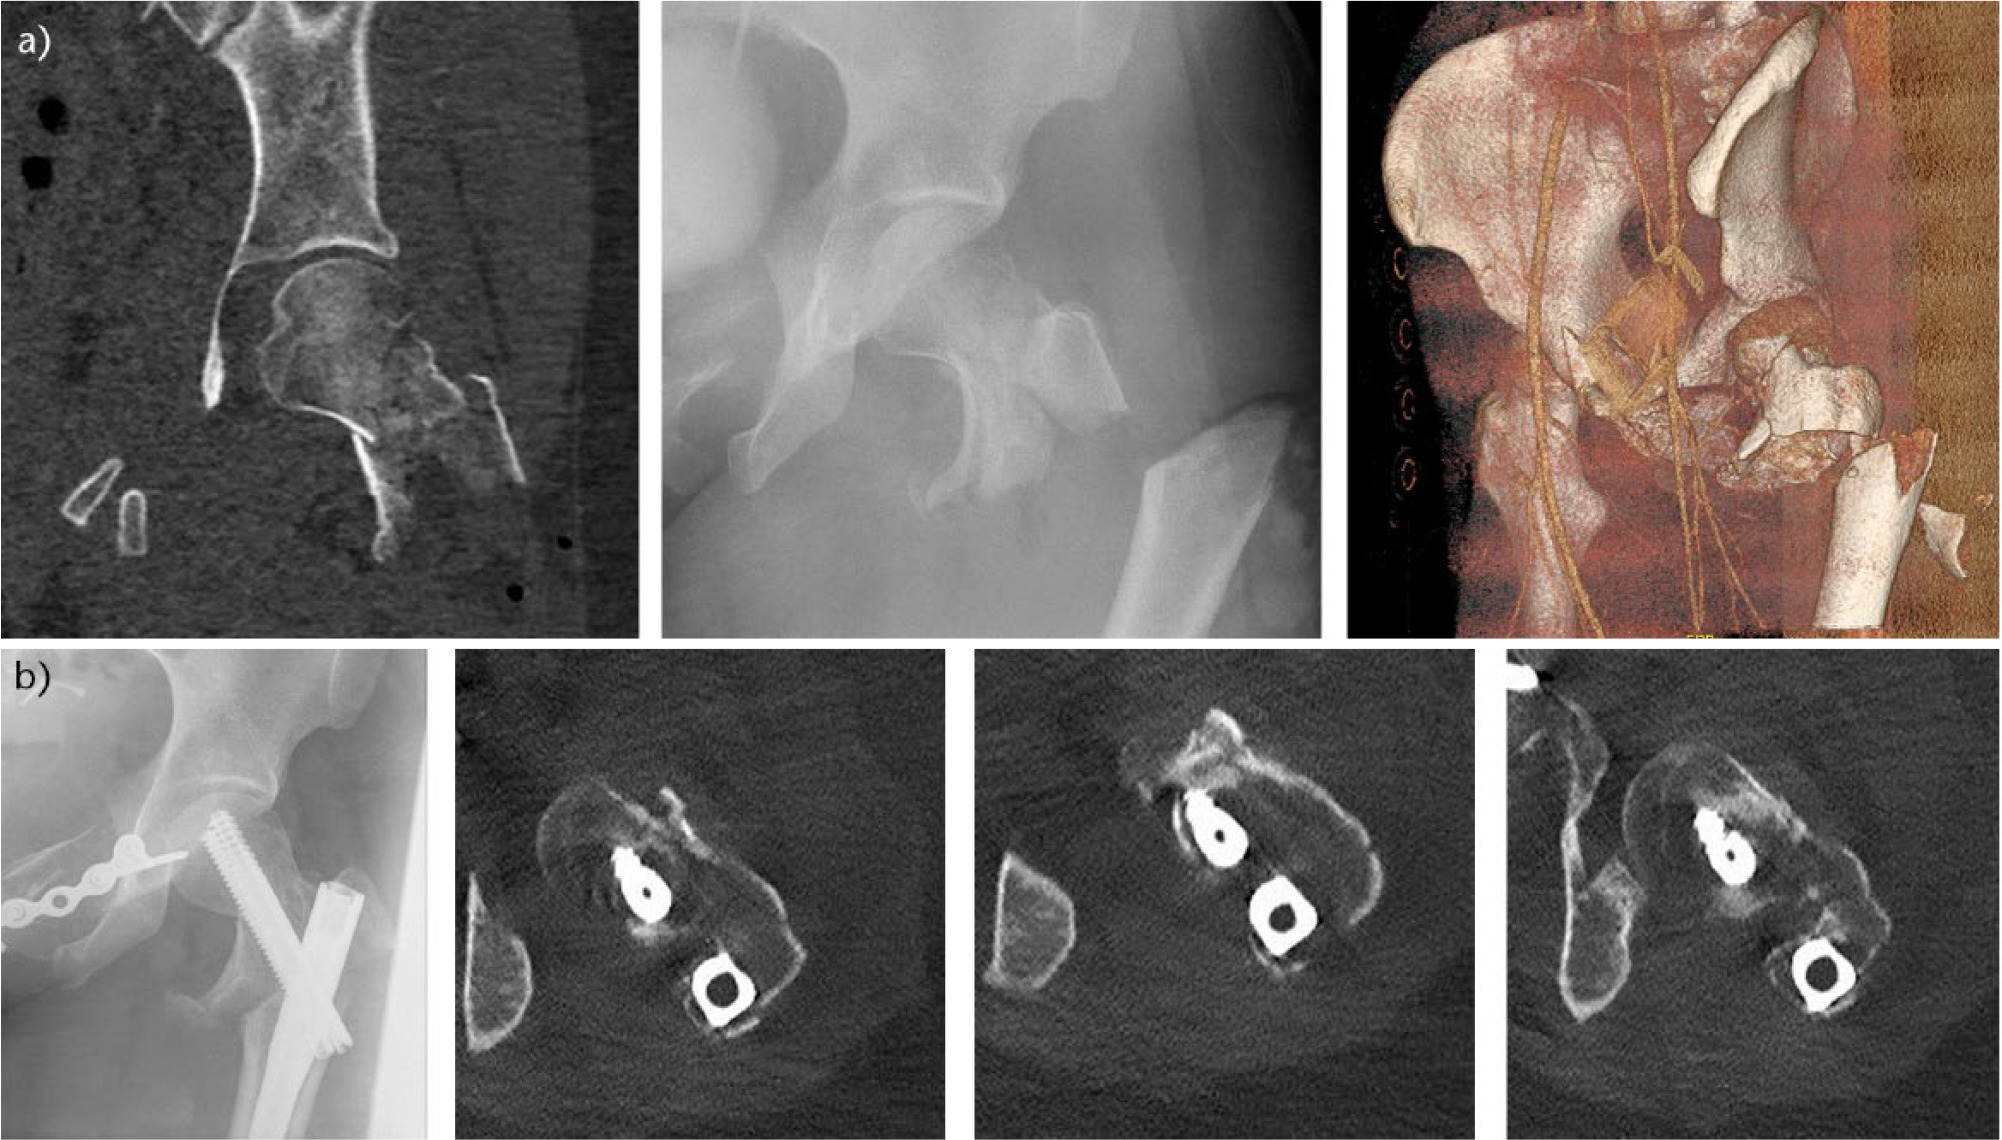 Fig. 5 
            Images showing fixed compression in a young patient; a) segmental open high energy femoral fracture with wedge component in the neck and b) 12-week radiographs and CT slices demonstrating anatomical reduction of the neck and maintenance of reduction with the fixed compression.
          